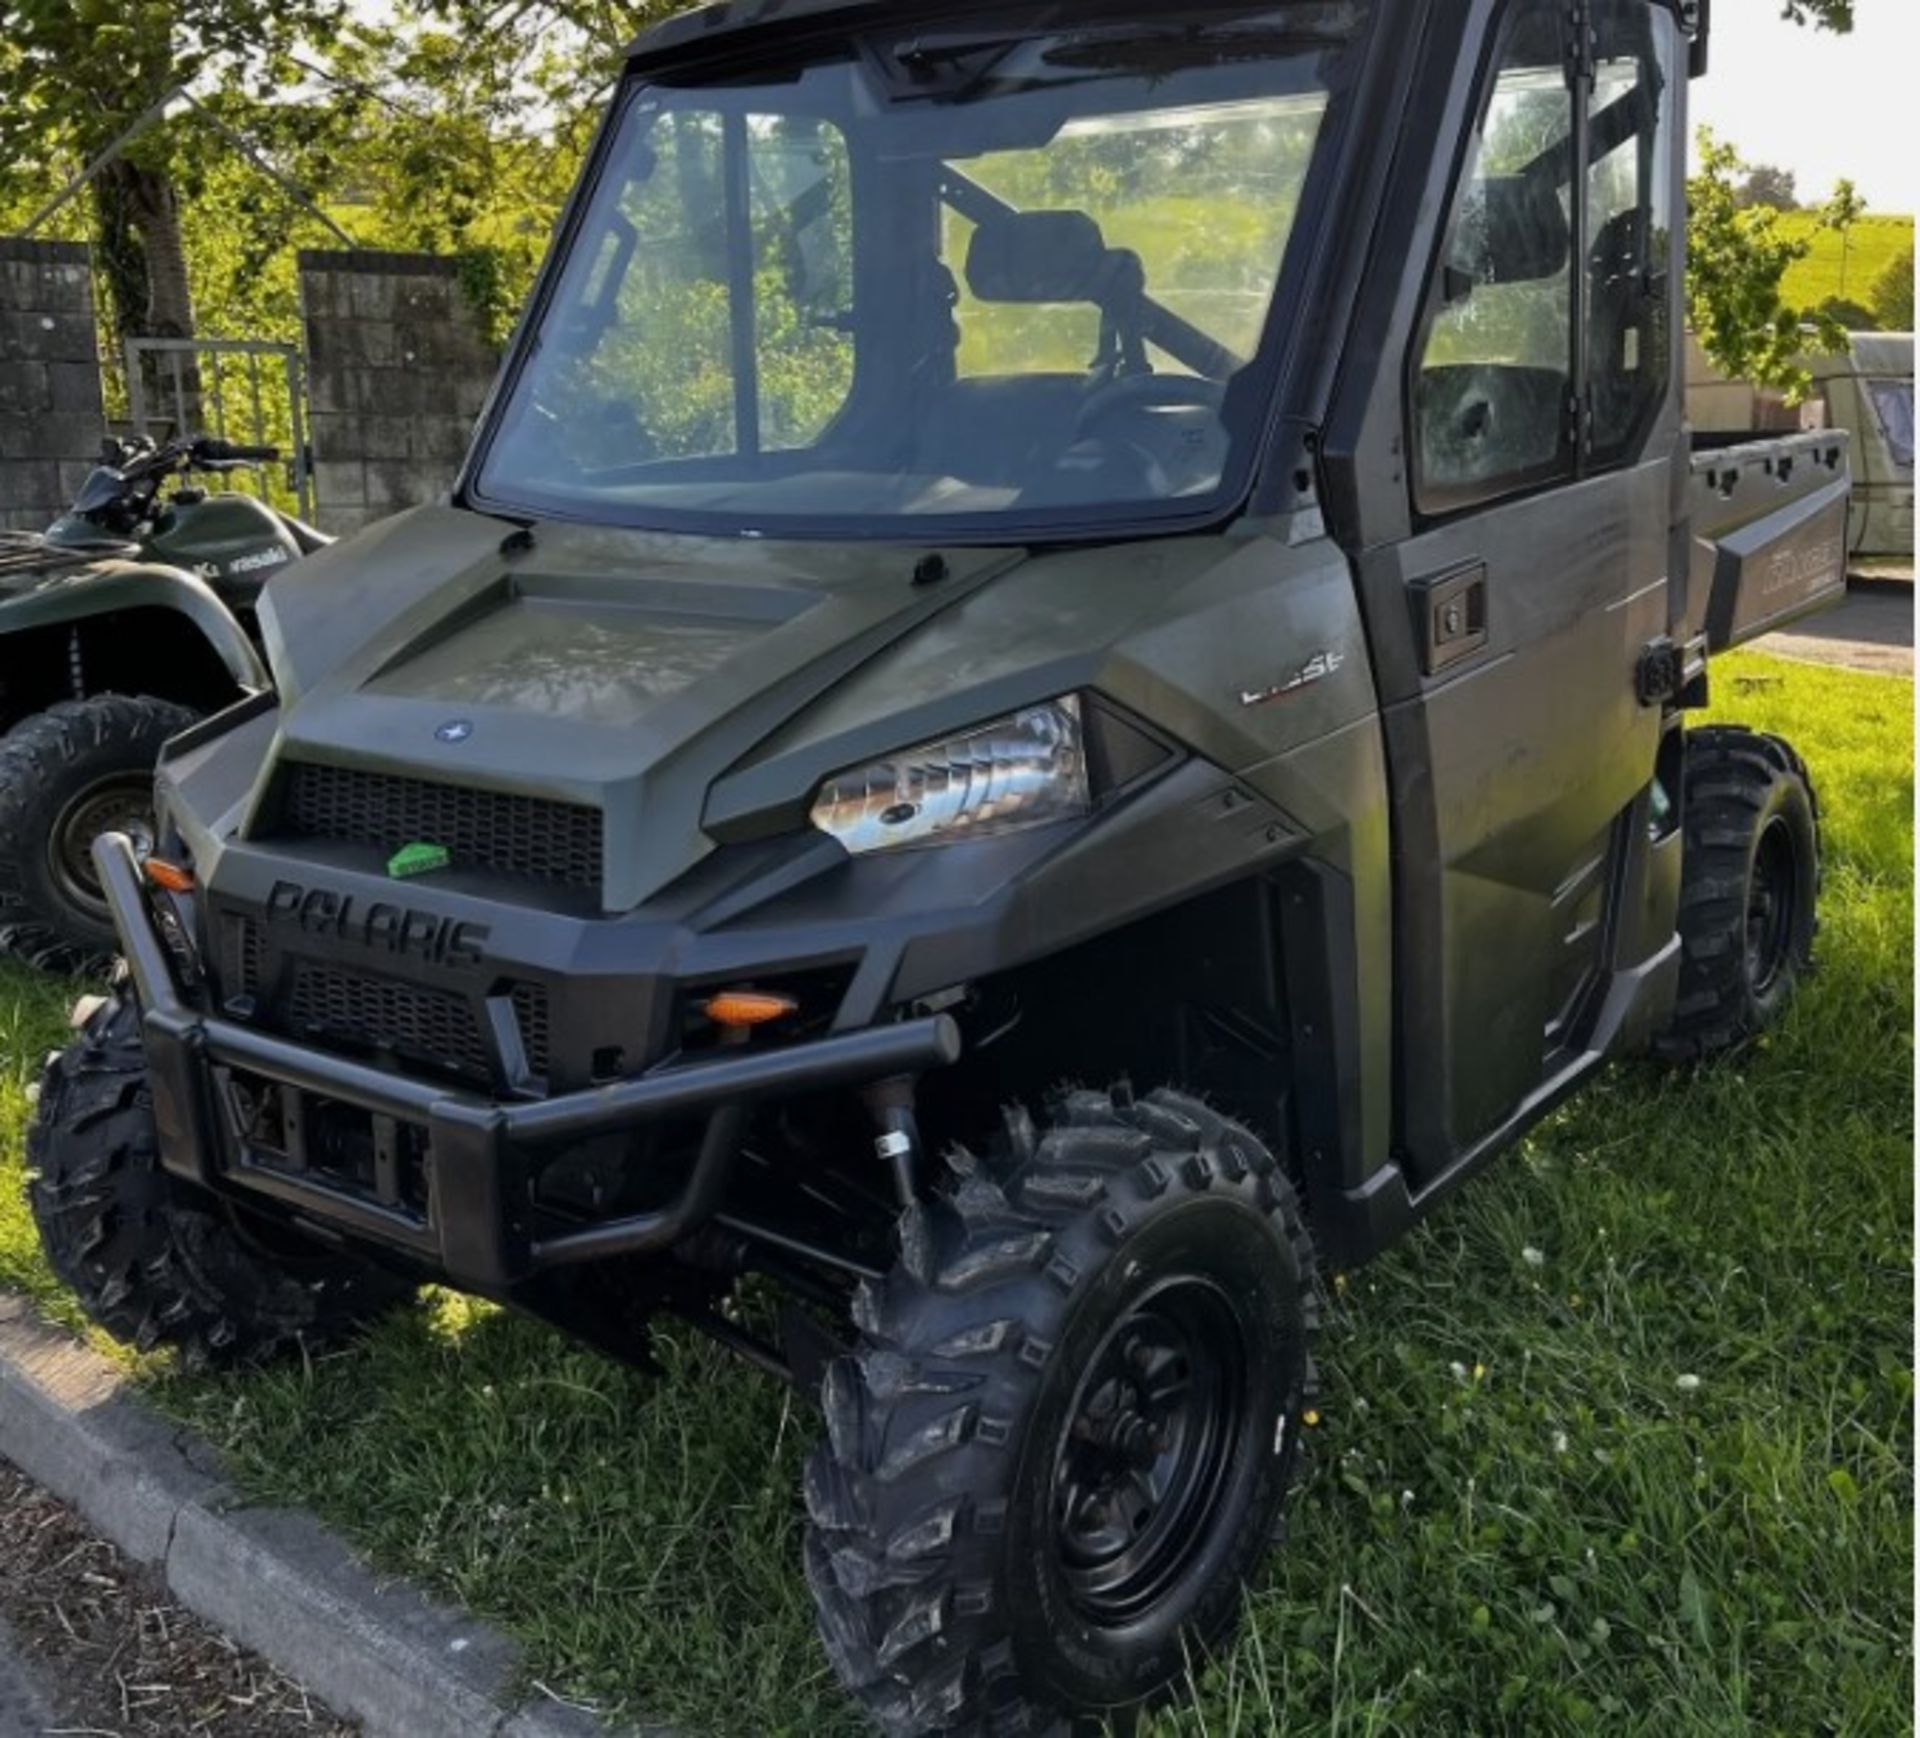 2019 POLARIS RANGER 1000D - YOUR ULTIMATE WORKHORSE FOR AGRICULTURAL TASKS - Image 11 of 11